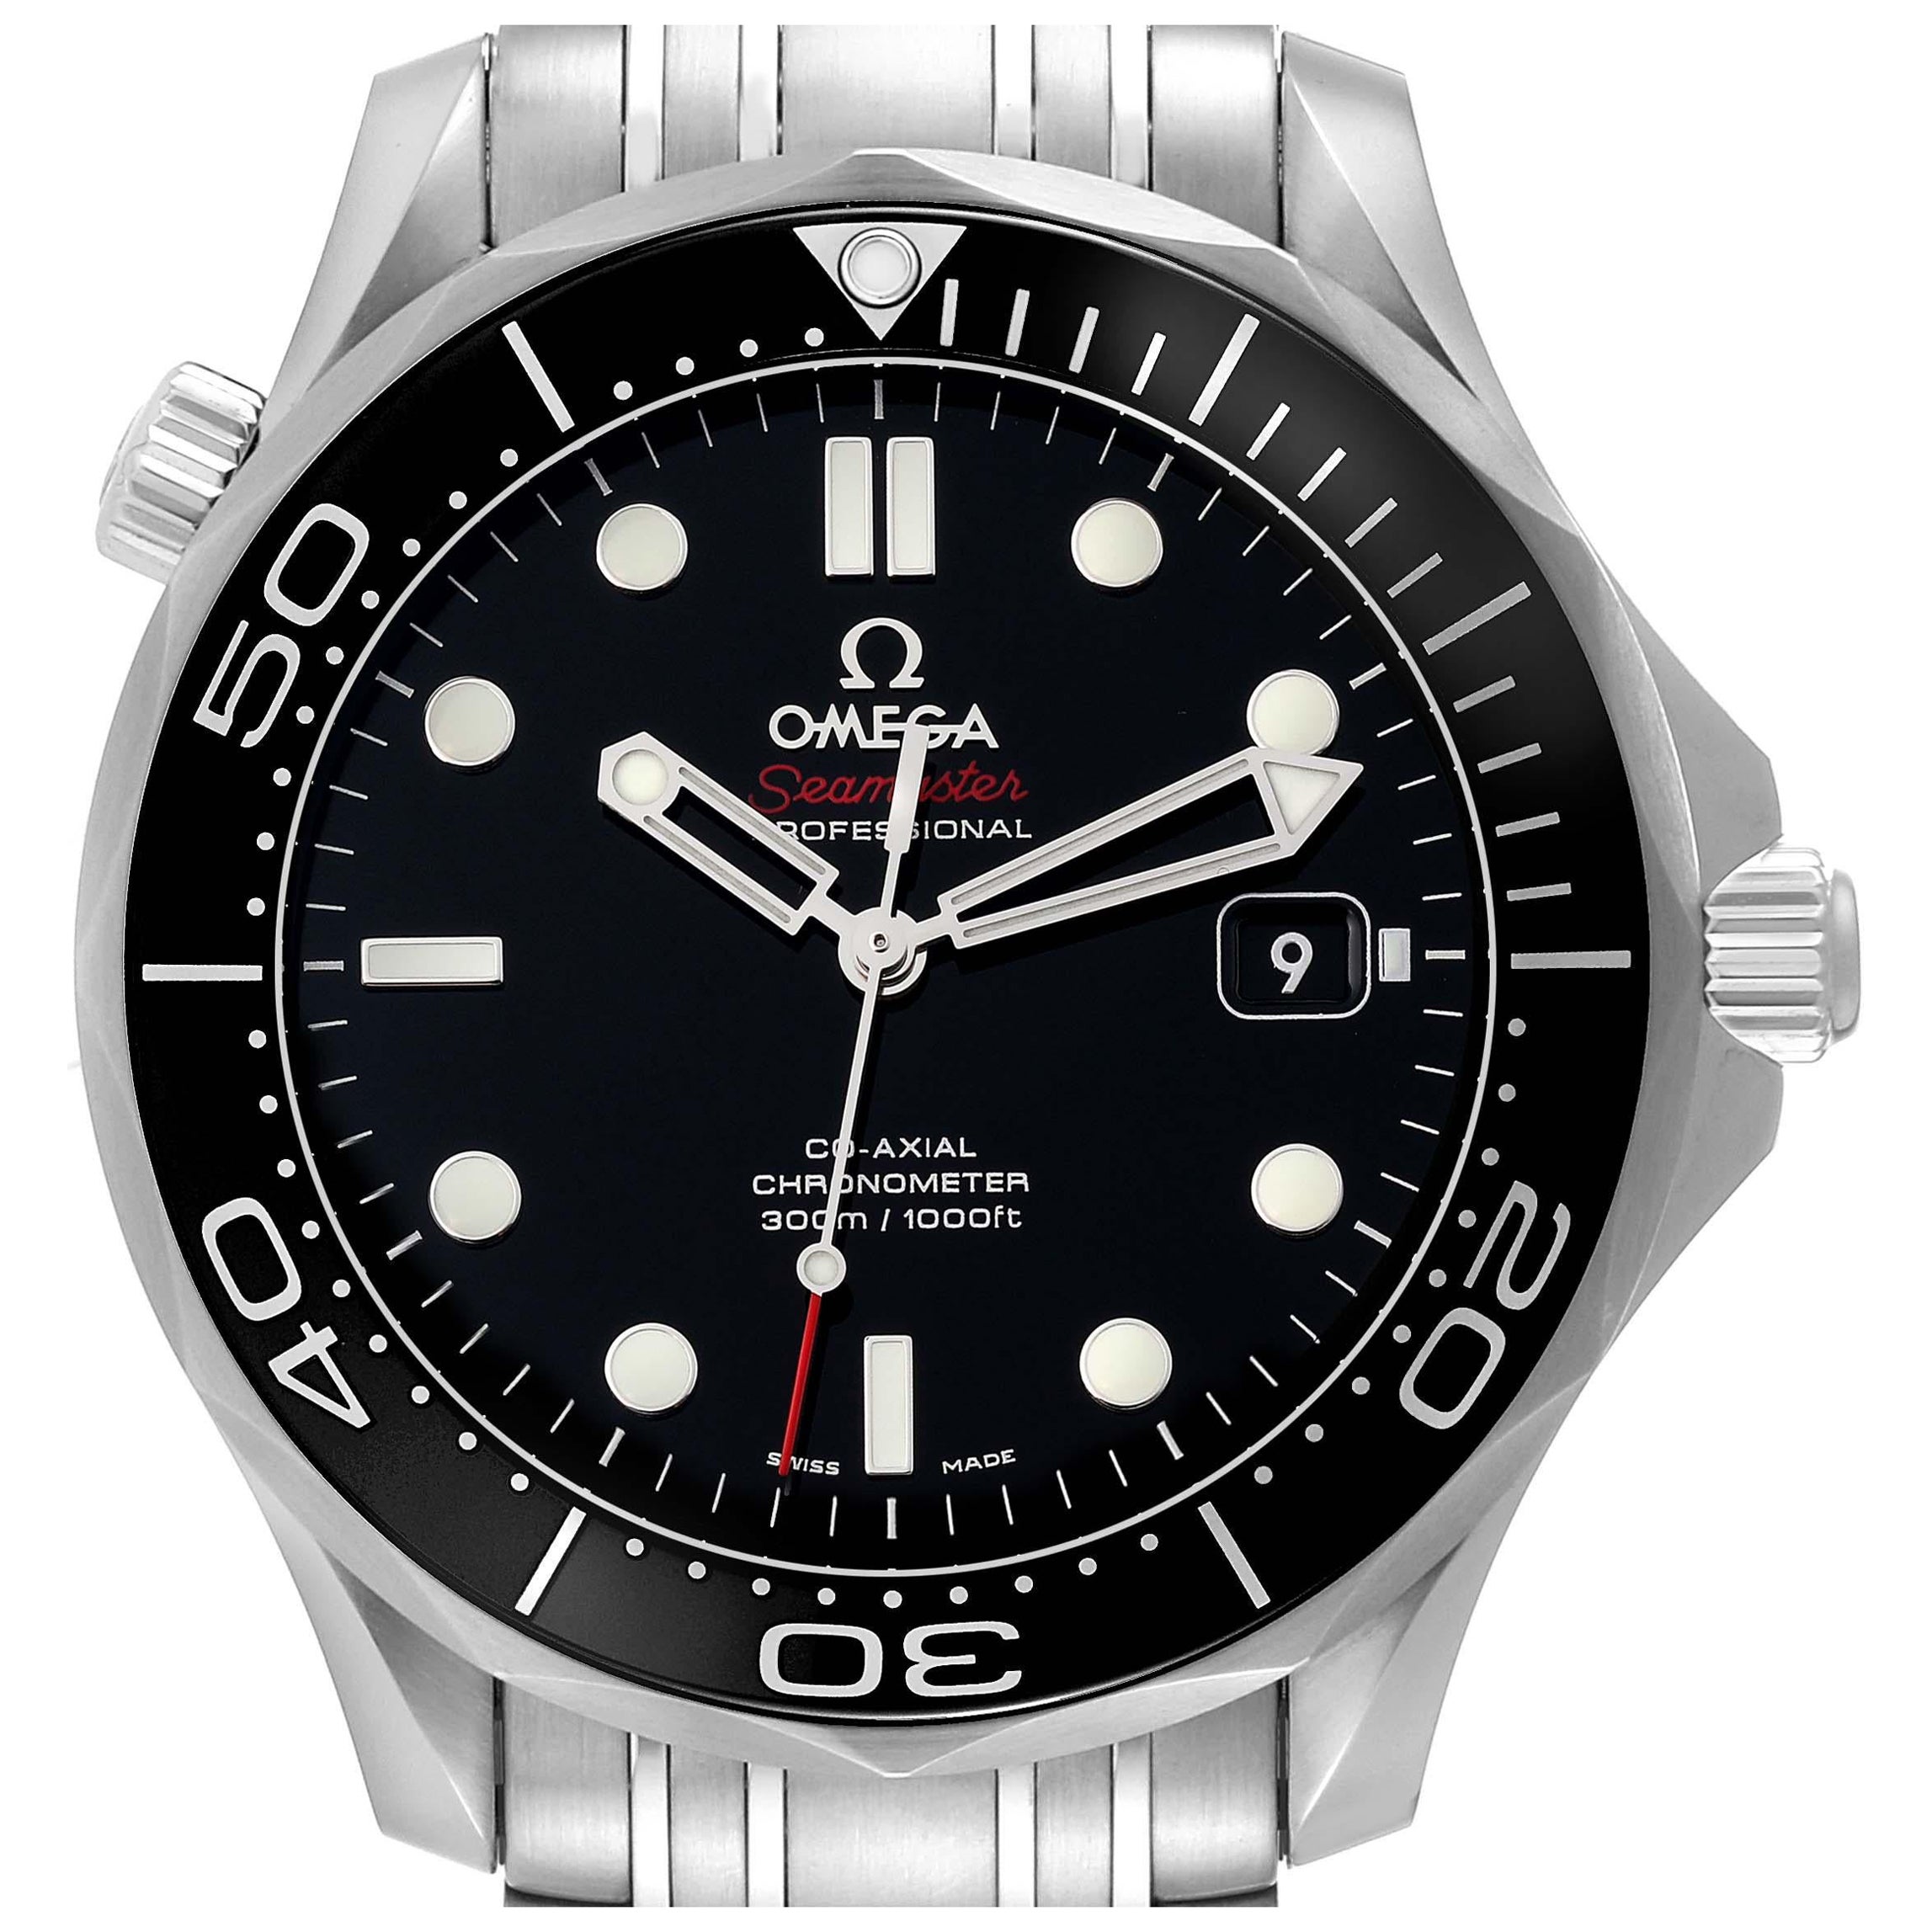 Omega Seamaster Diver 300M Steel Mens Watch 212.30.41.20.01.003 Box Card For Sale